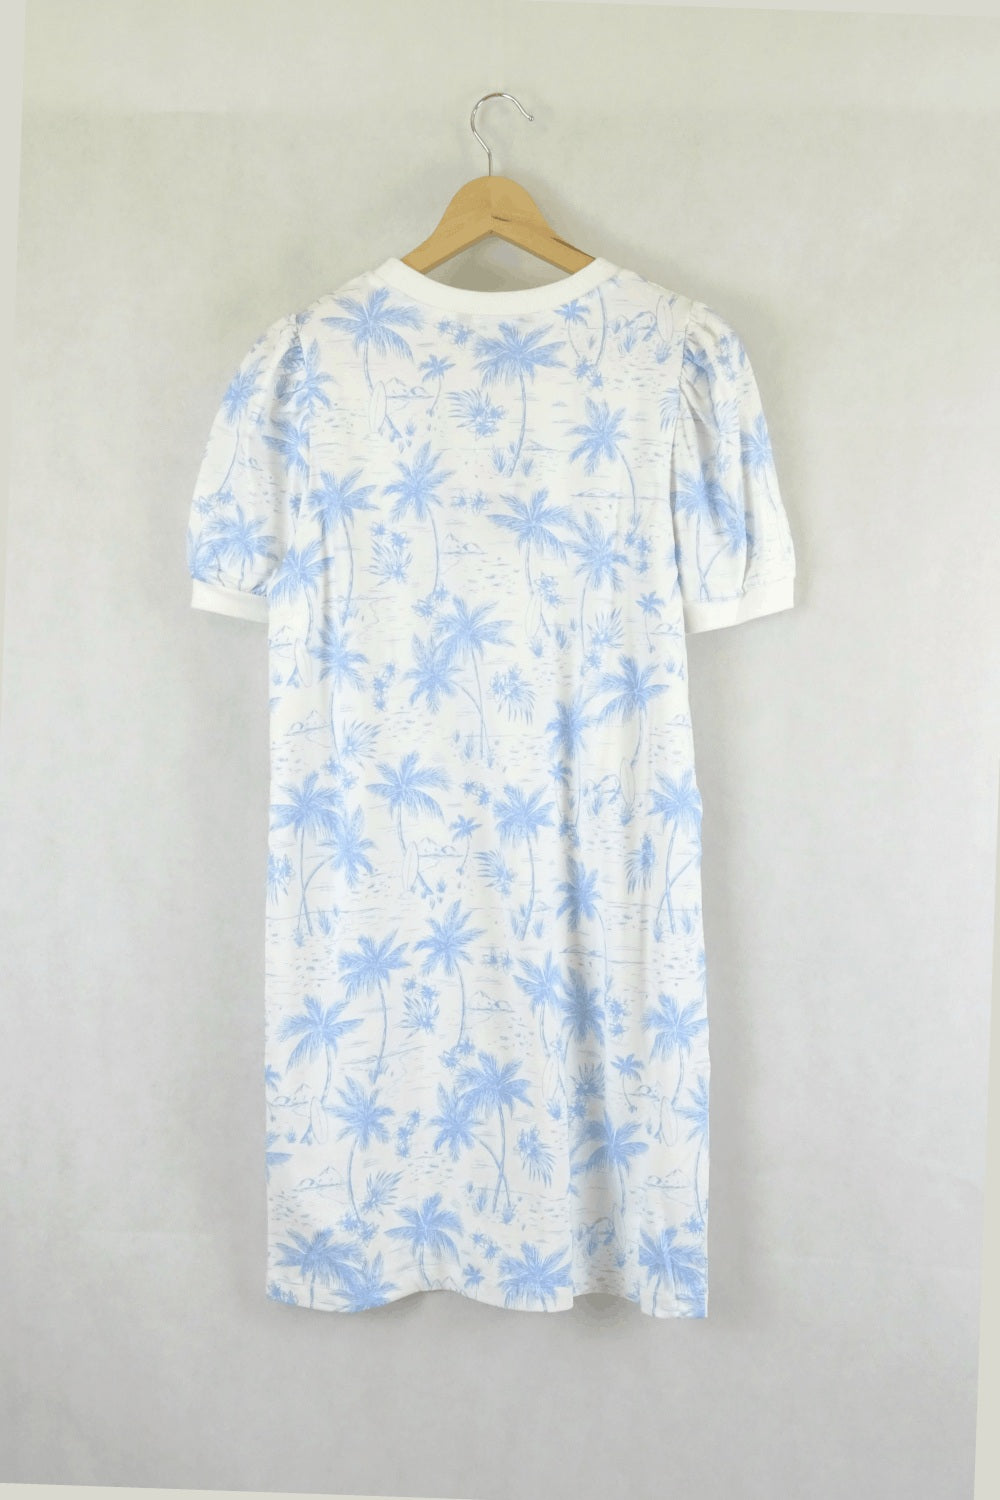 French Connection Blue And White Tropical Print Short Sleeve Tshirt Dress S